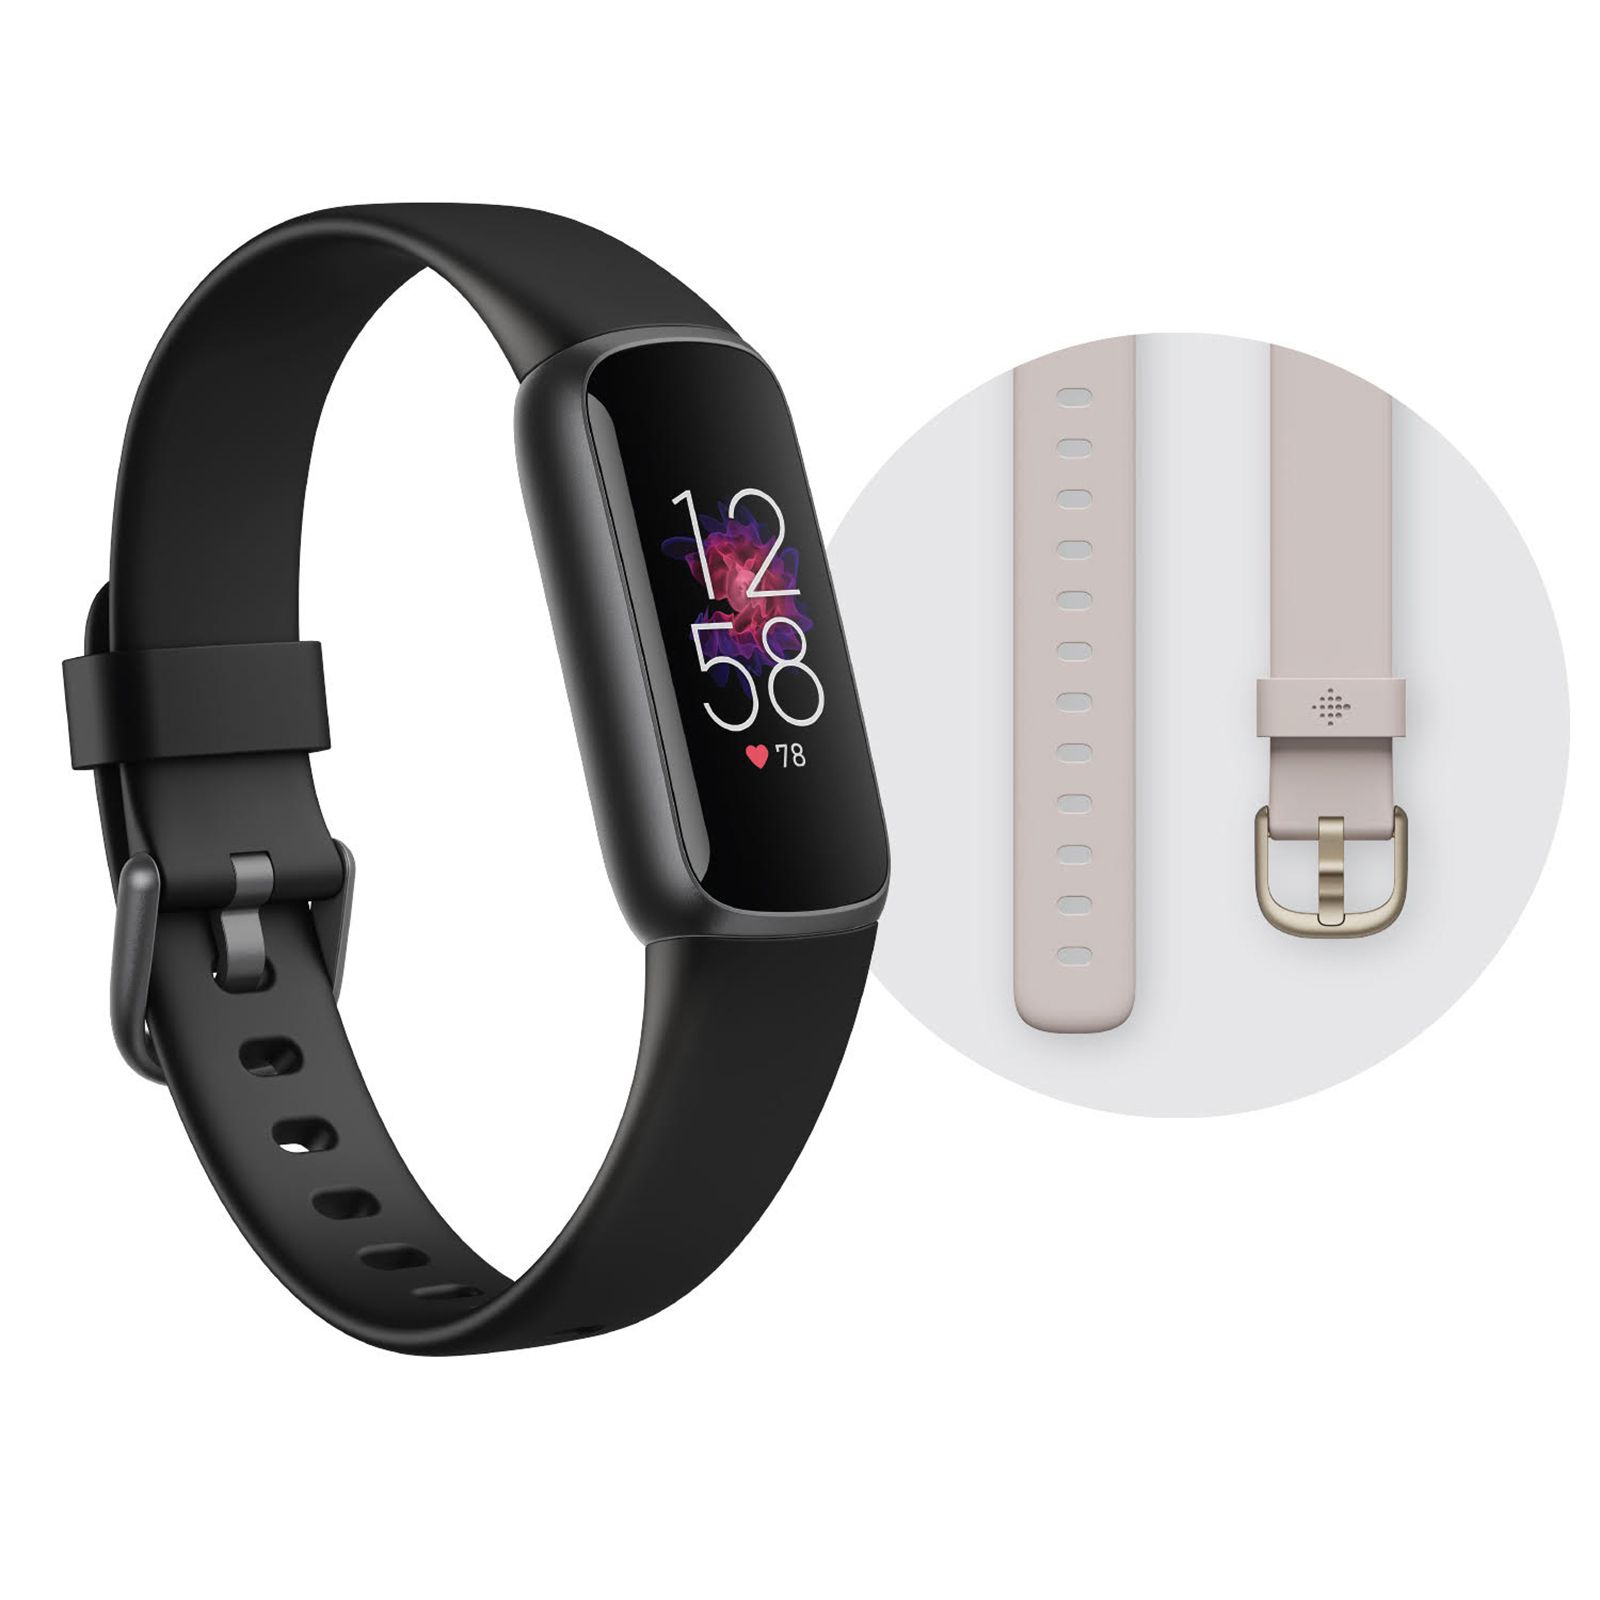 Fitbit Luxe Fitness and Wellness Tracker Bundle with One-Size Band and Bonus Small Band - Black